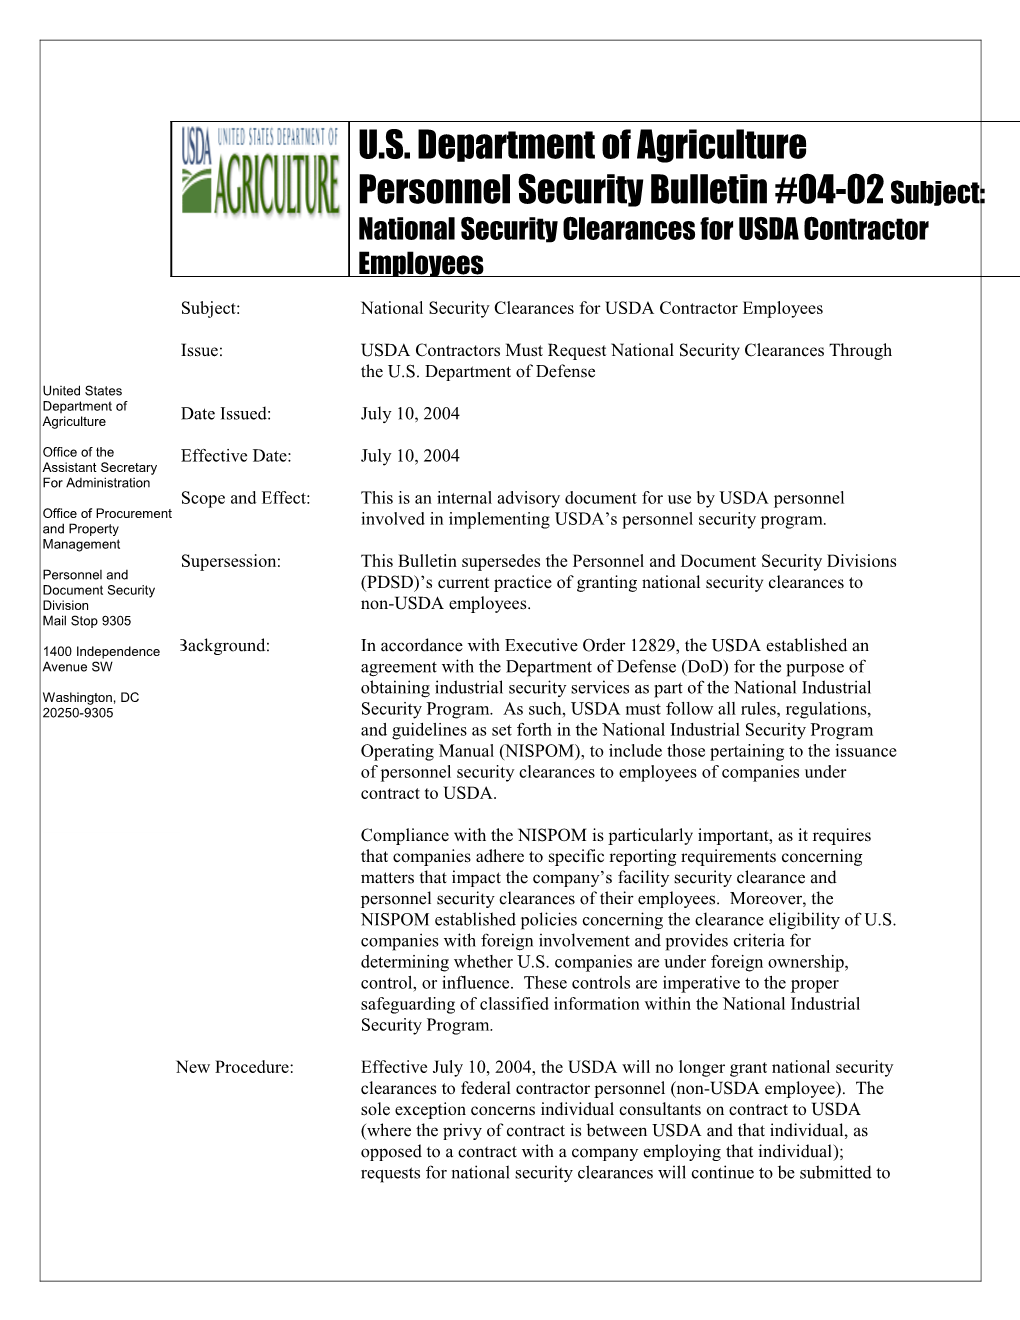 USDA Personnel Security Bulletin #04-02